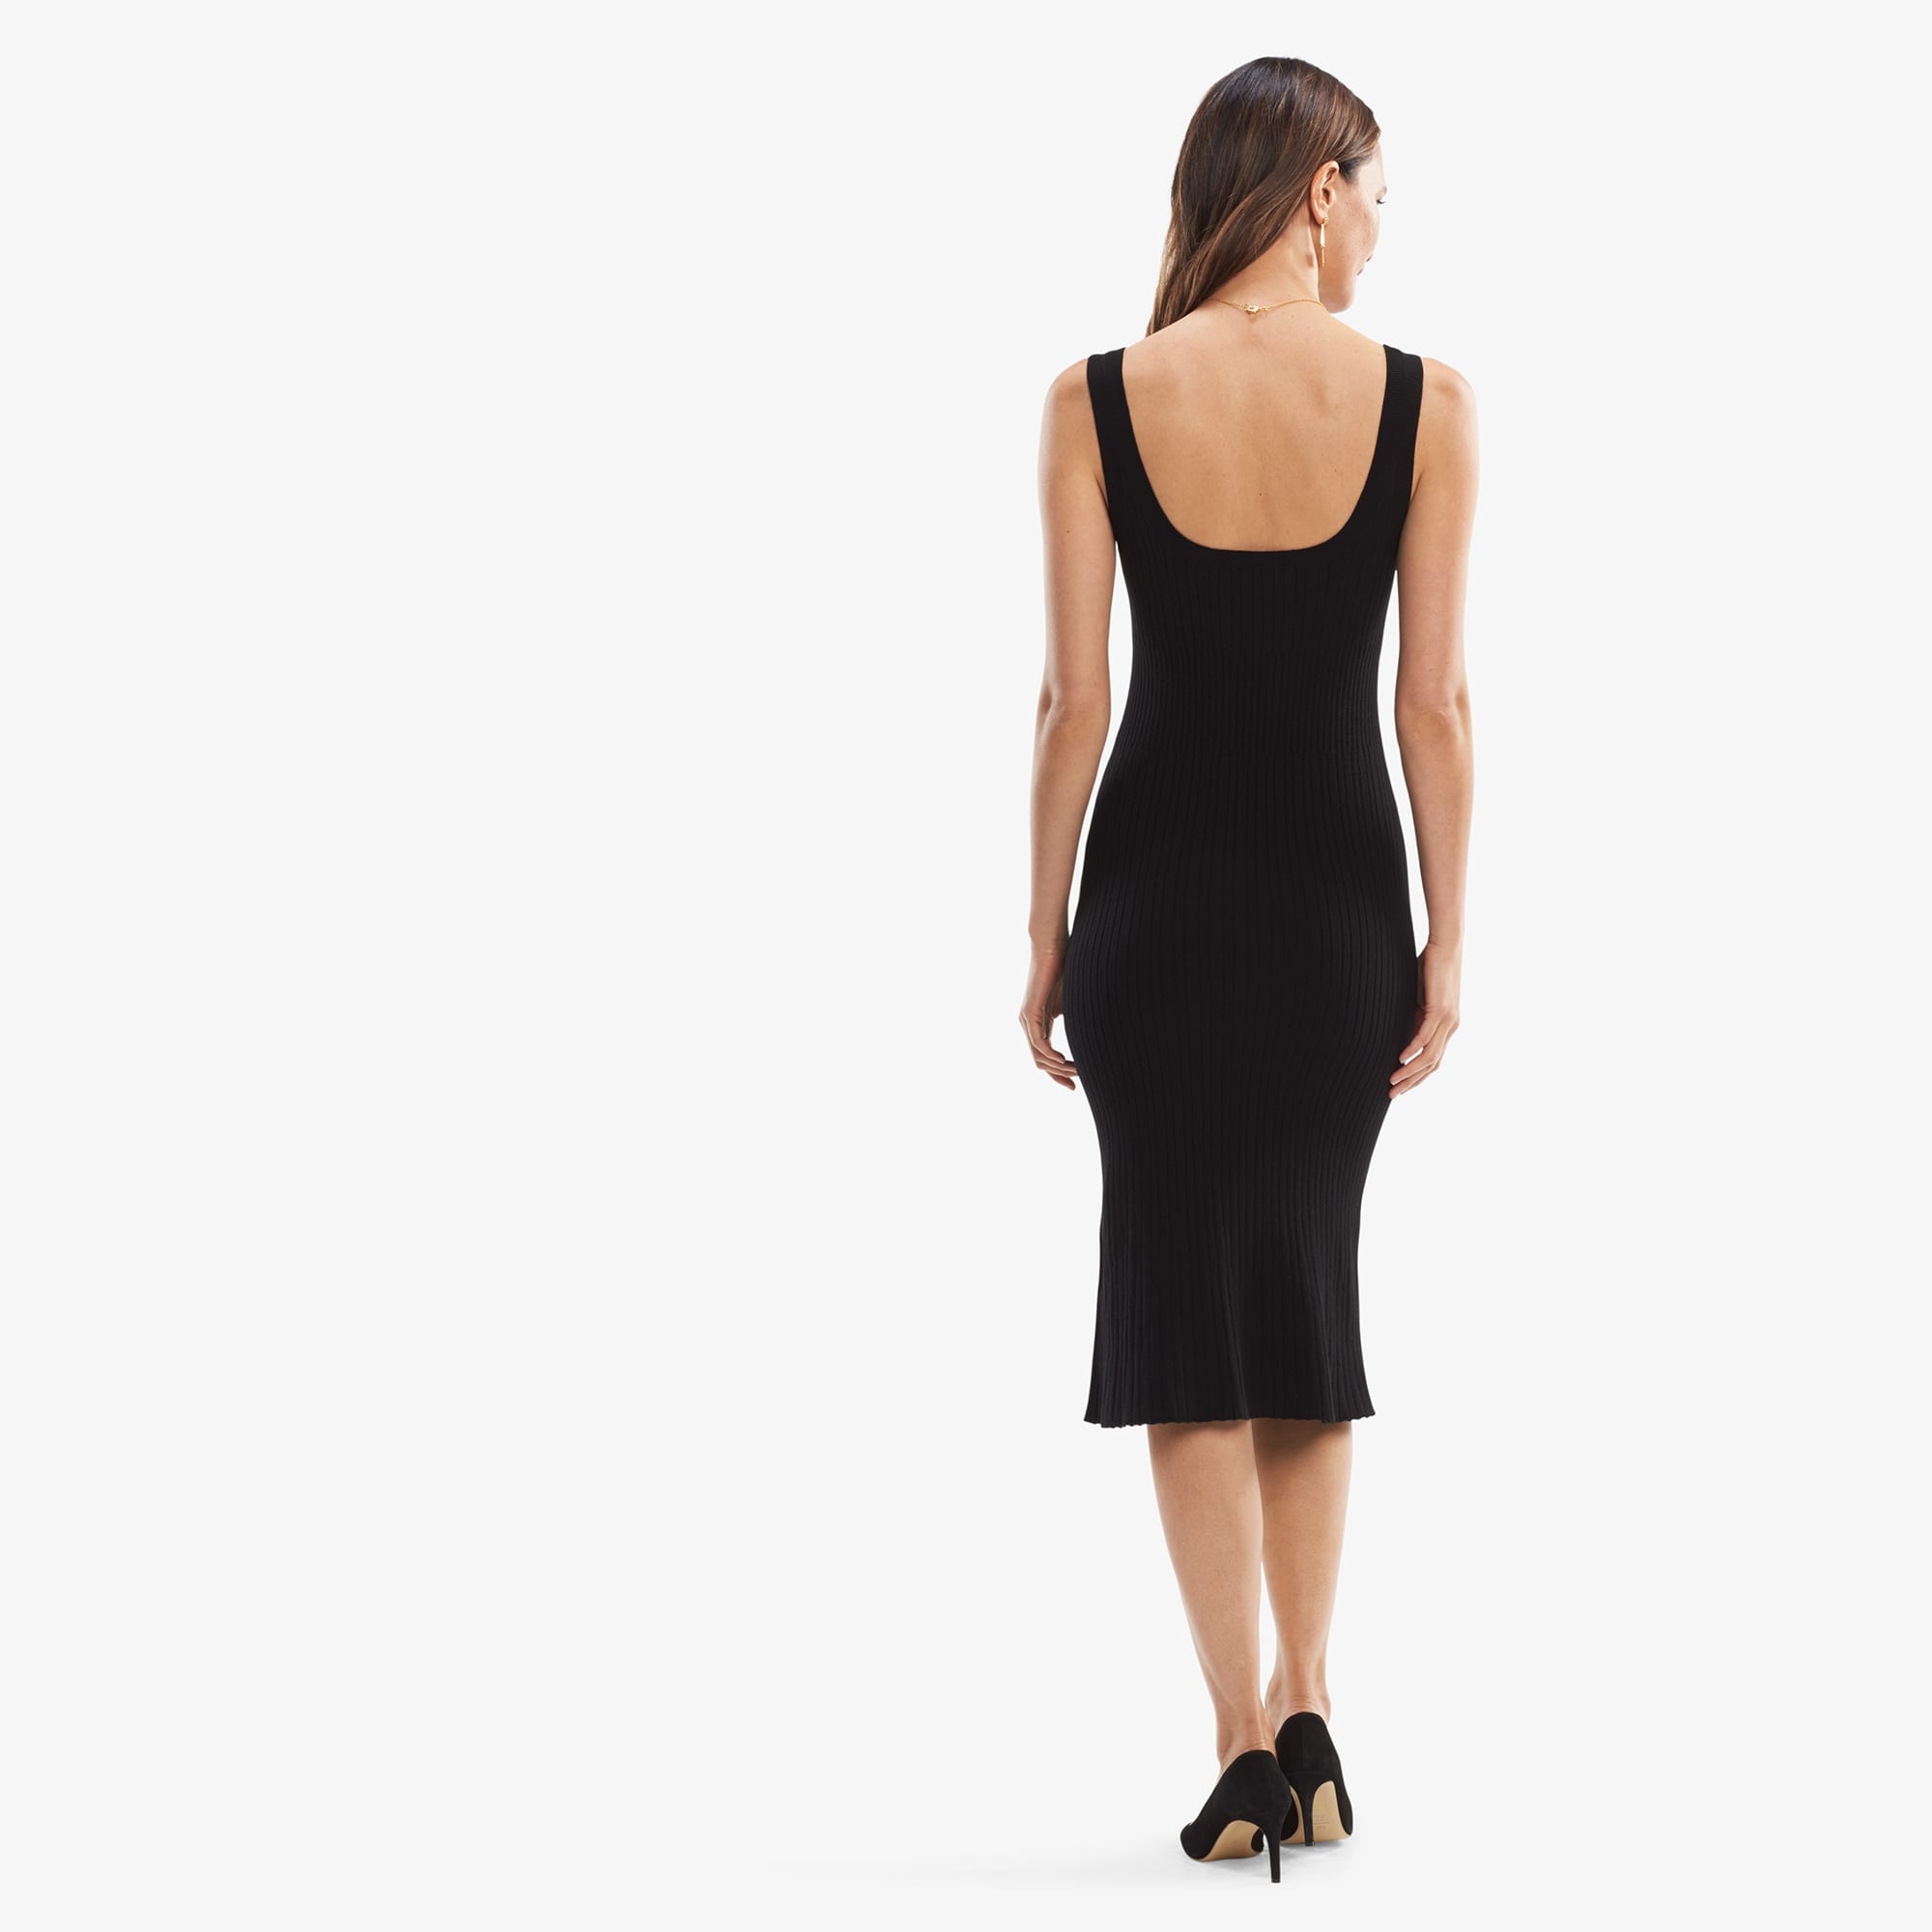 Back image of a woman standing wearing the Gwen Dress in Black